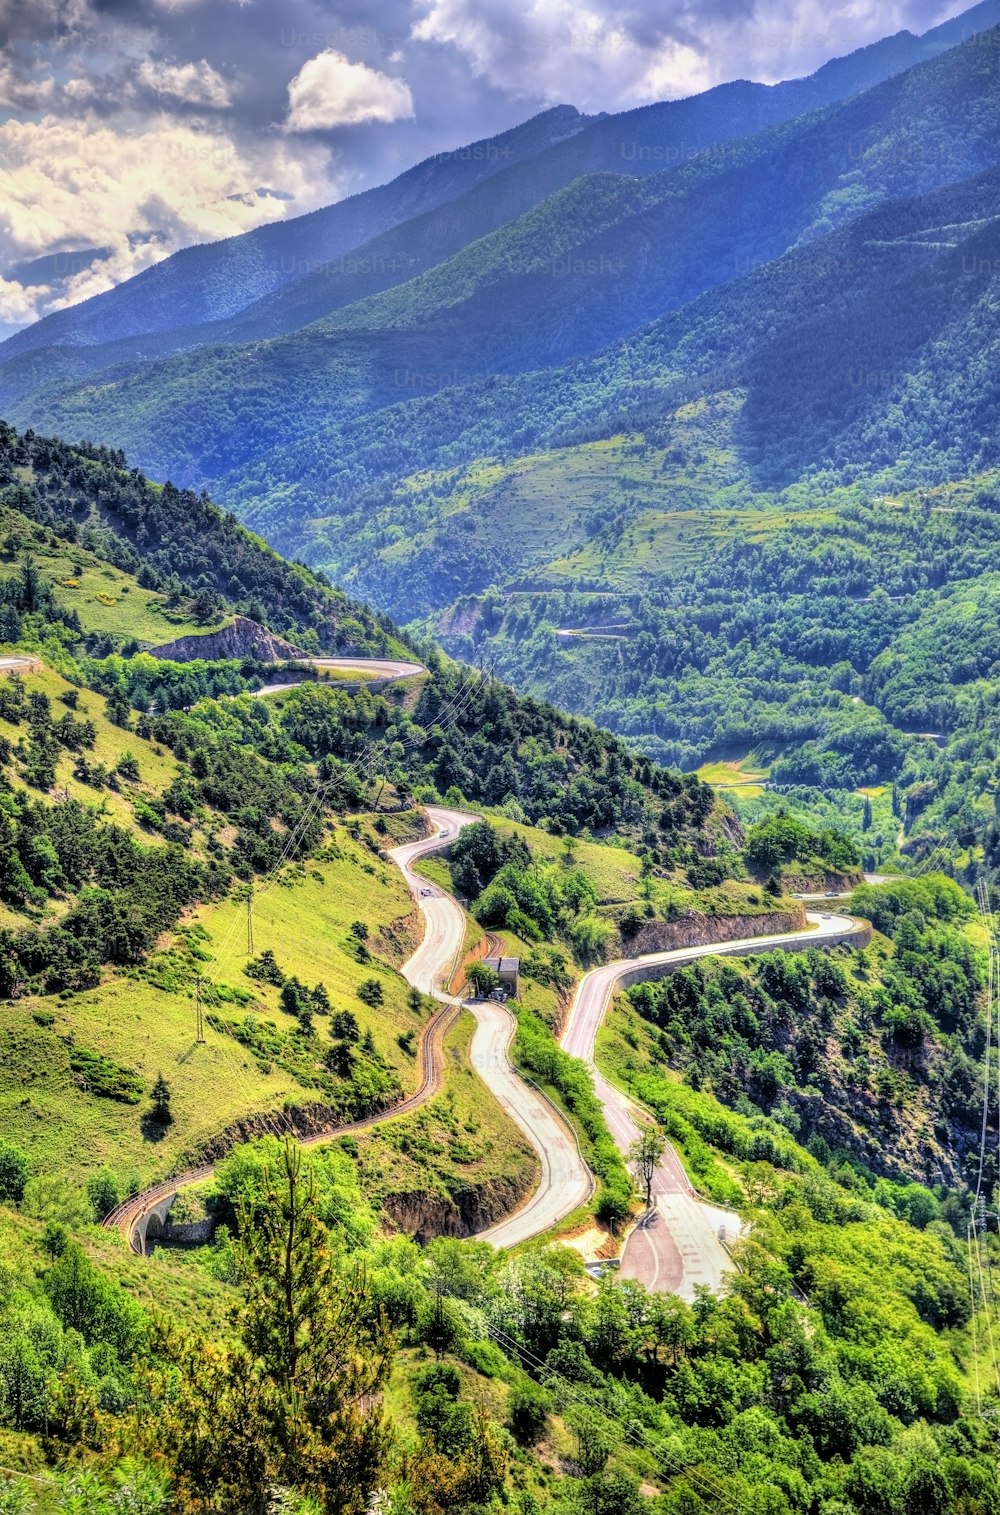 Mountain pass in Pyrenees-Orientales department, France